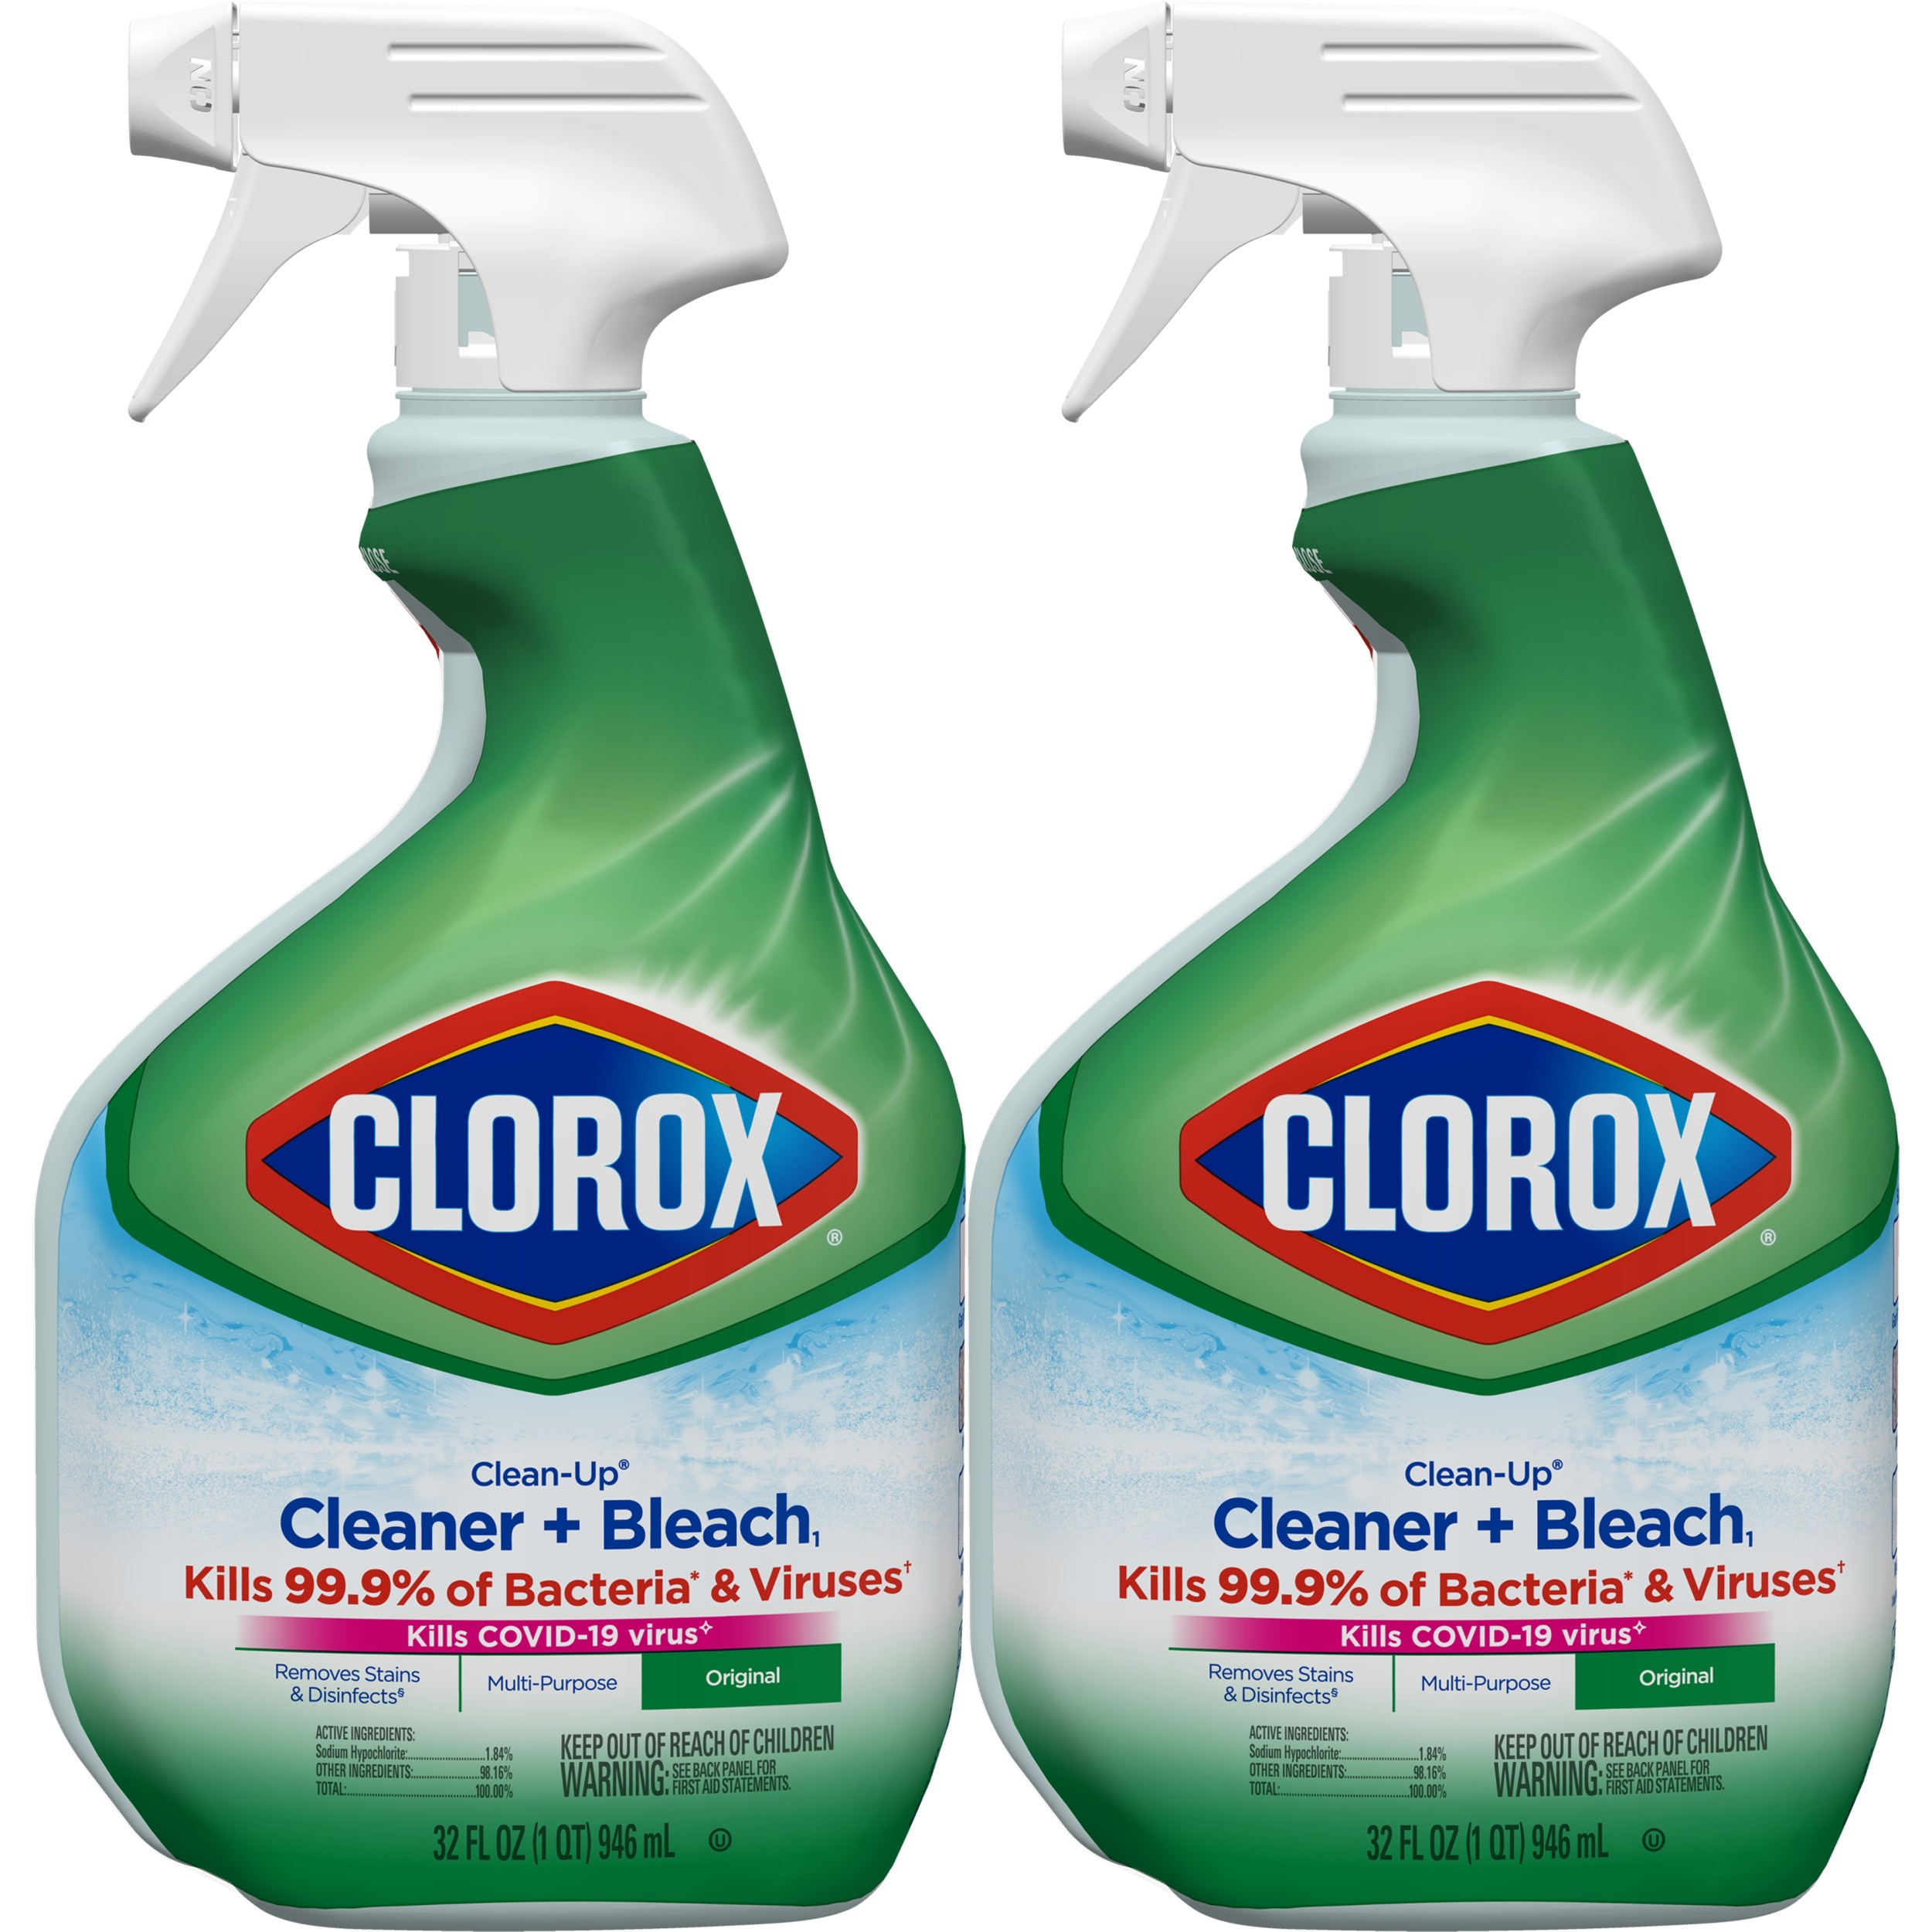 Clorox Clean-Up All Purpose Cleaner with Bleach, Spray Bottle, Original, 32 Fluid Ounces (Pack of 2) - image 1 of 14